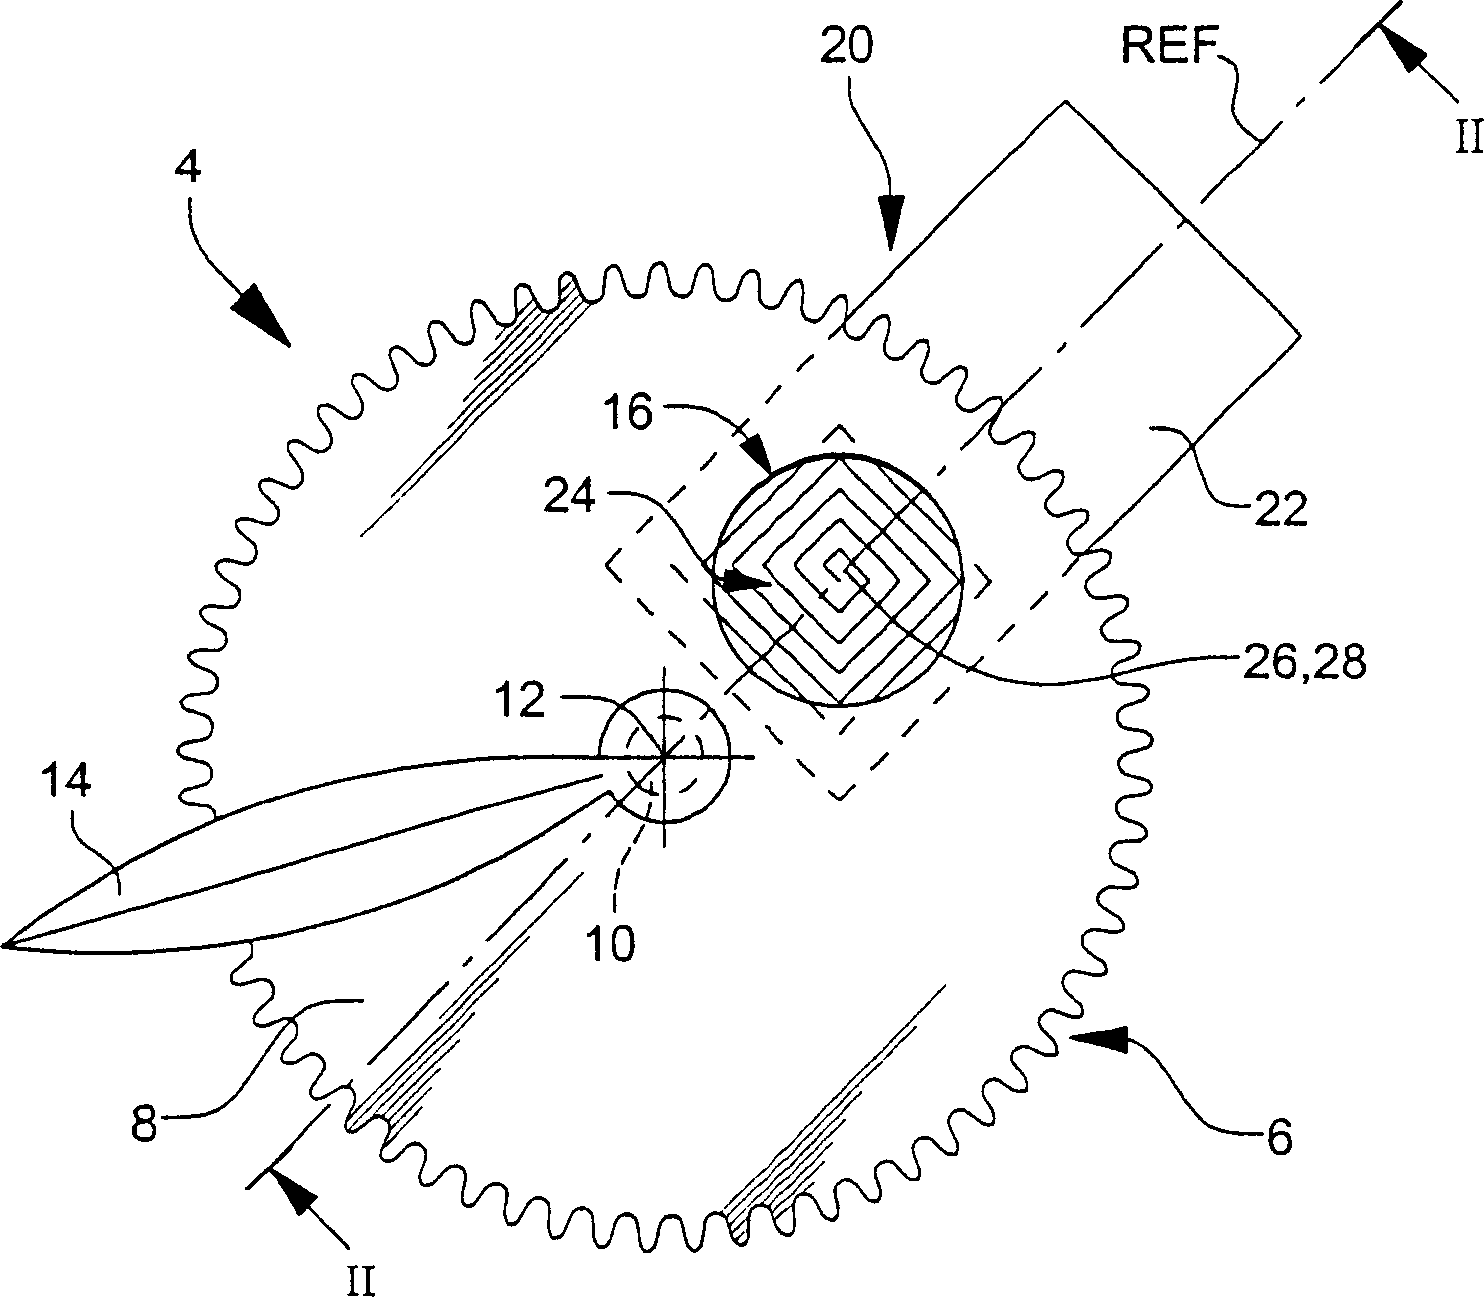 Method for synchronising an analog display of a timepiece with its electronic time base